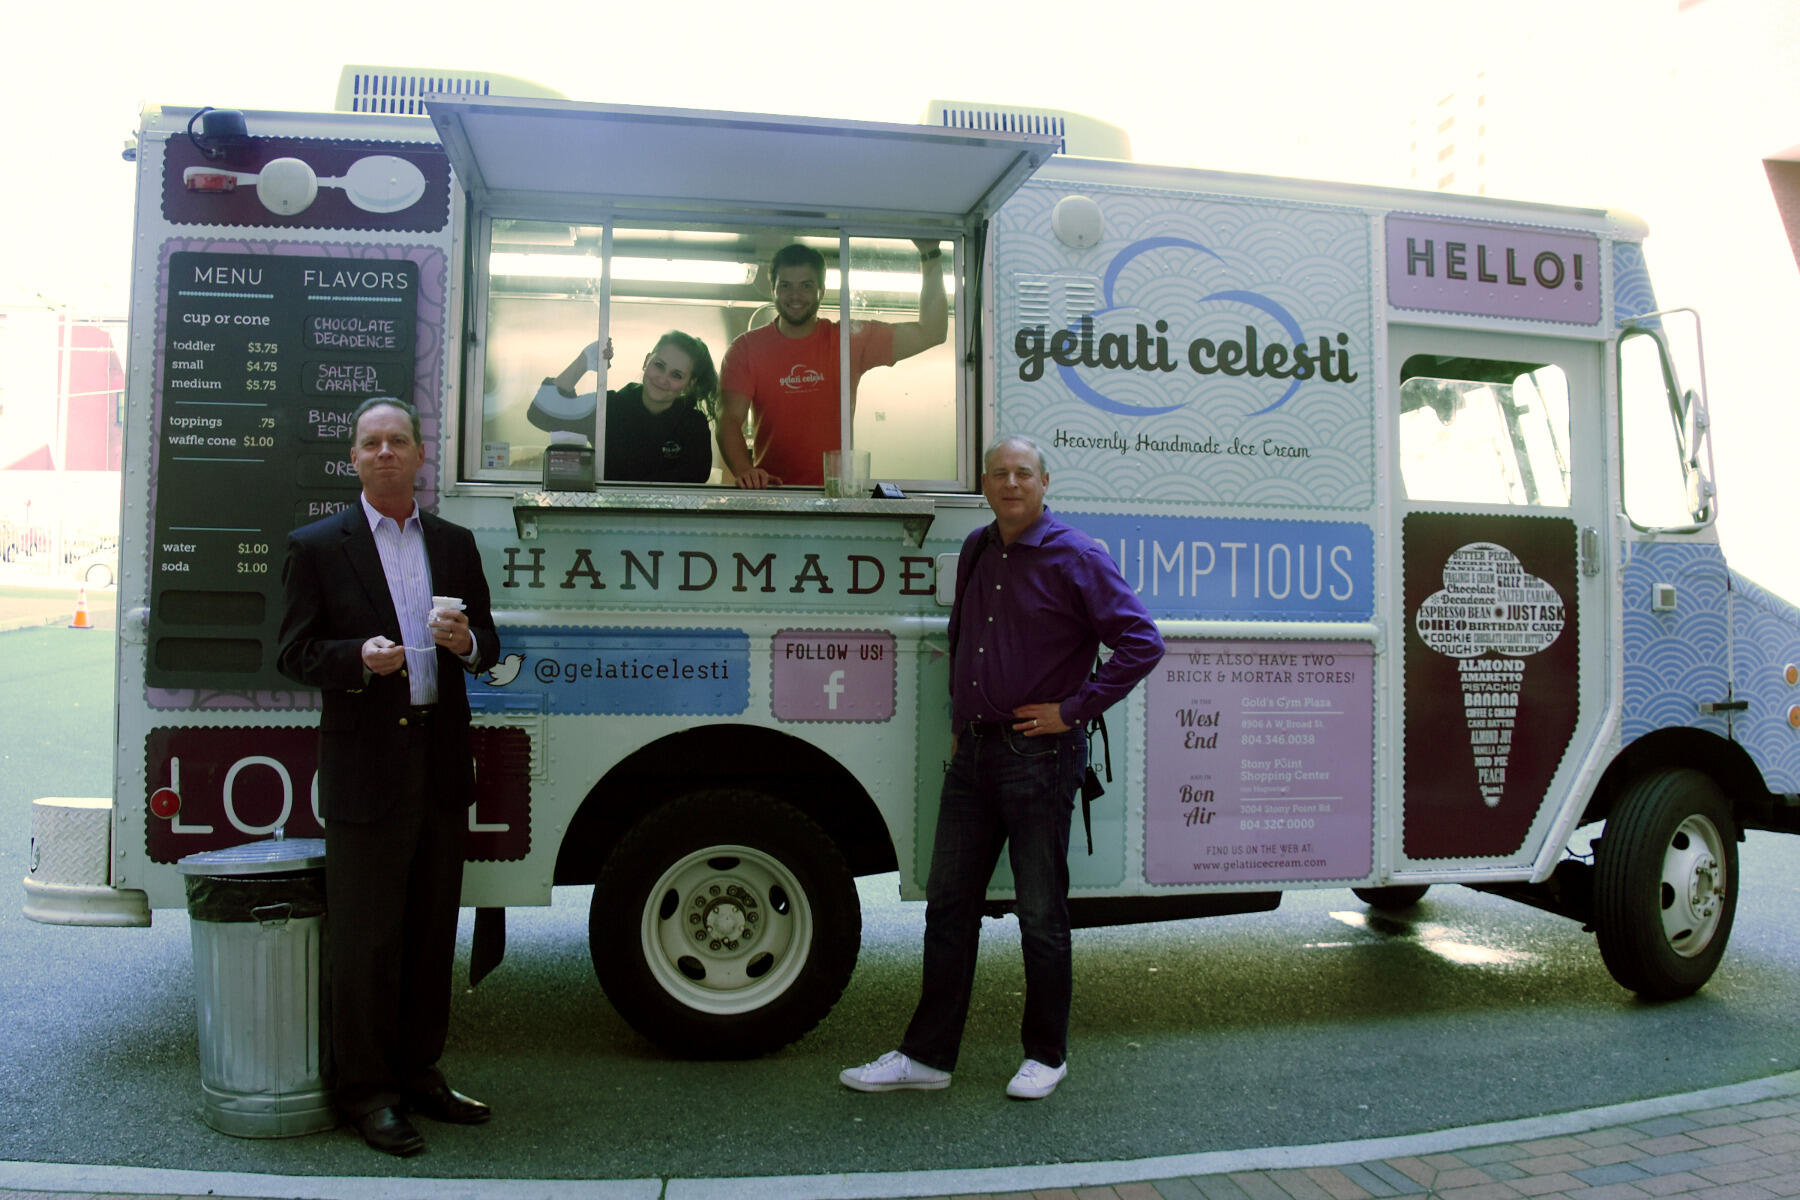 Wayne Slough, a faculty member in the School of Business, enjoys a treat with Gelati Celesti owner Steve Rosser. Photos by Gigi Huang.